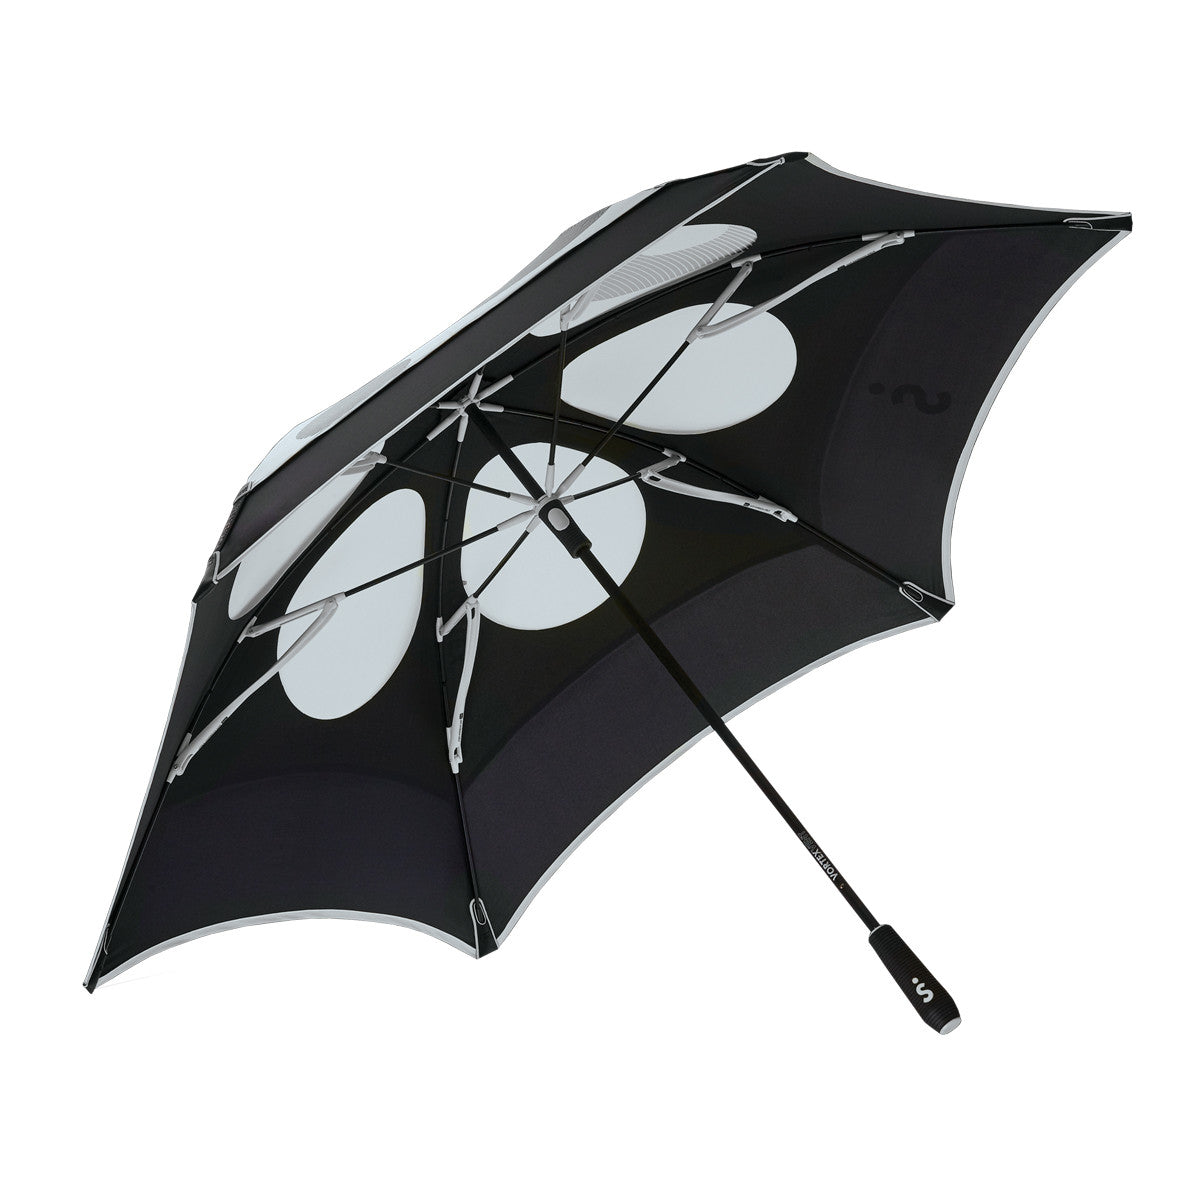 light grey and black vented double canopy wind-resistant three person golf umbrella with fiberglass frame and rubber grip, open on its side